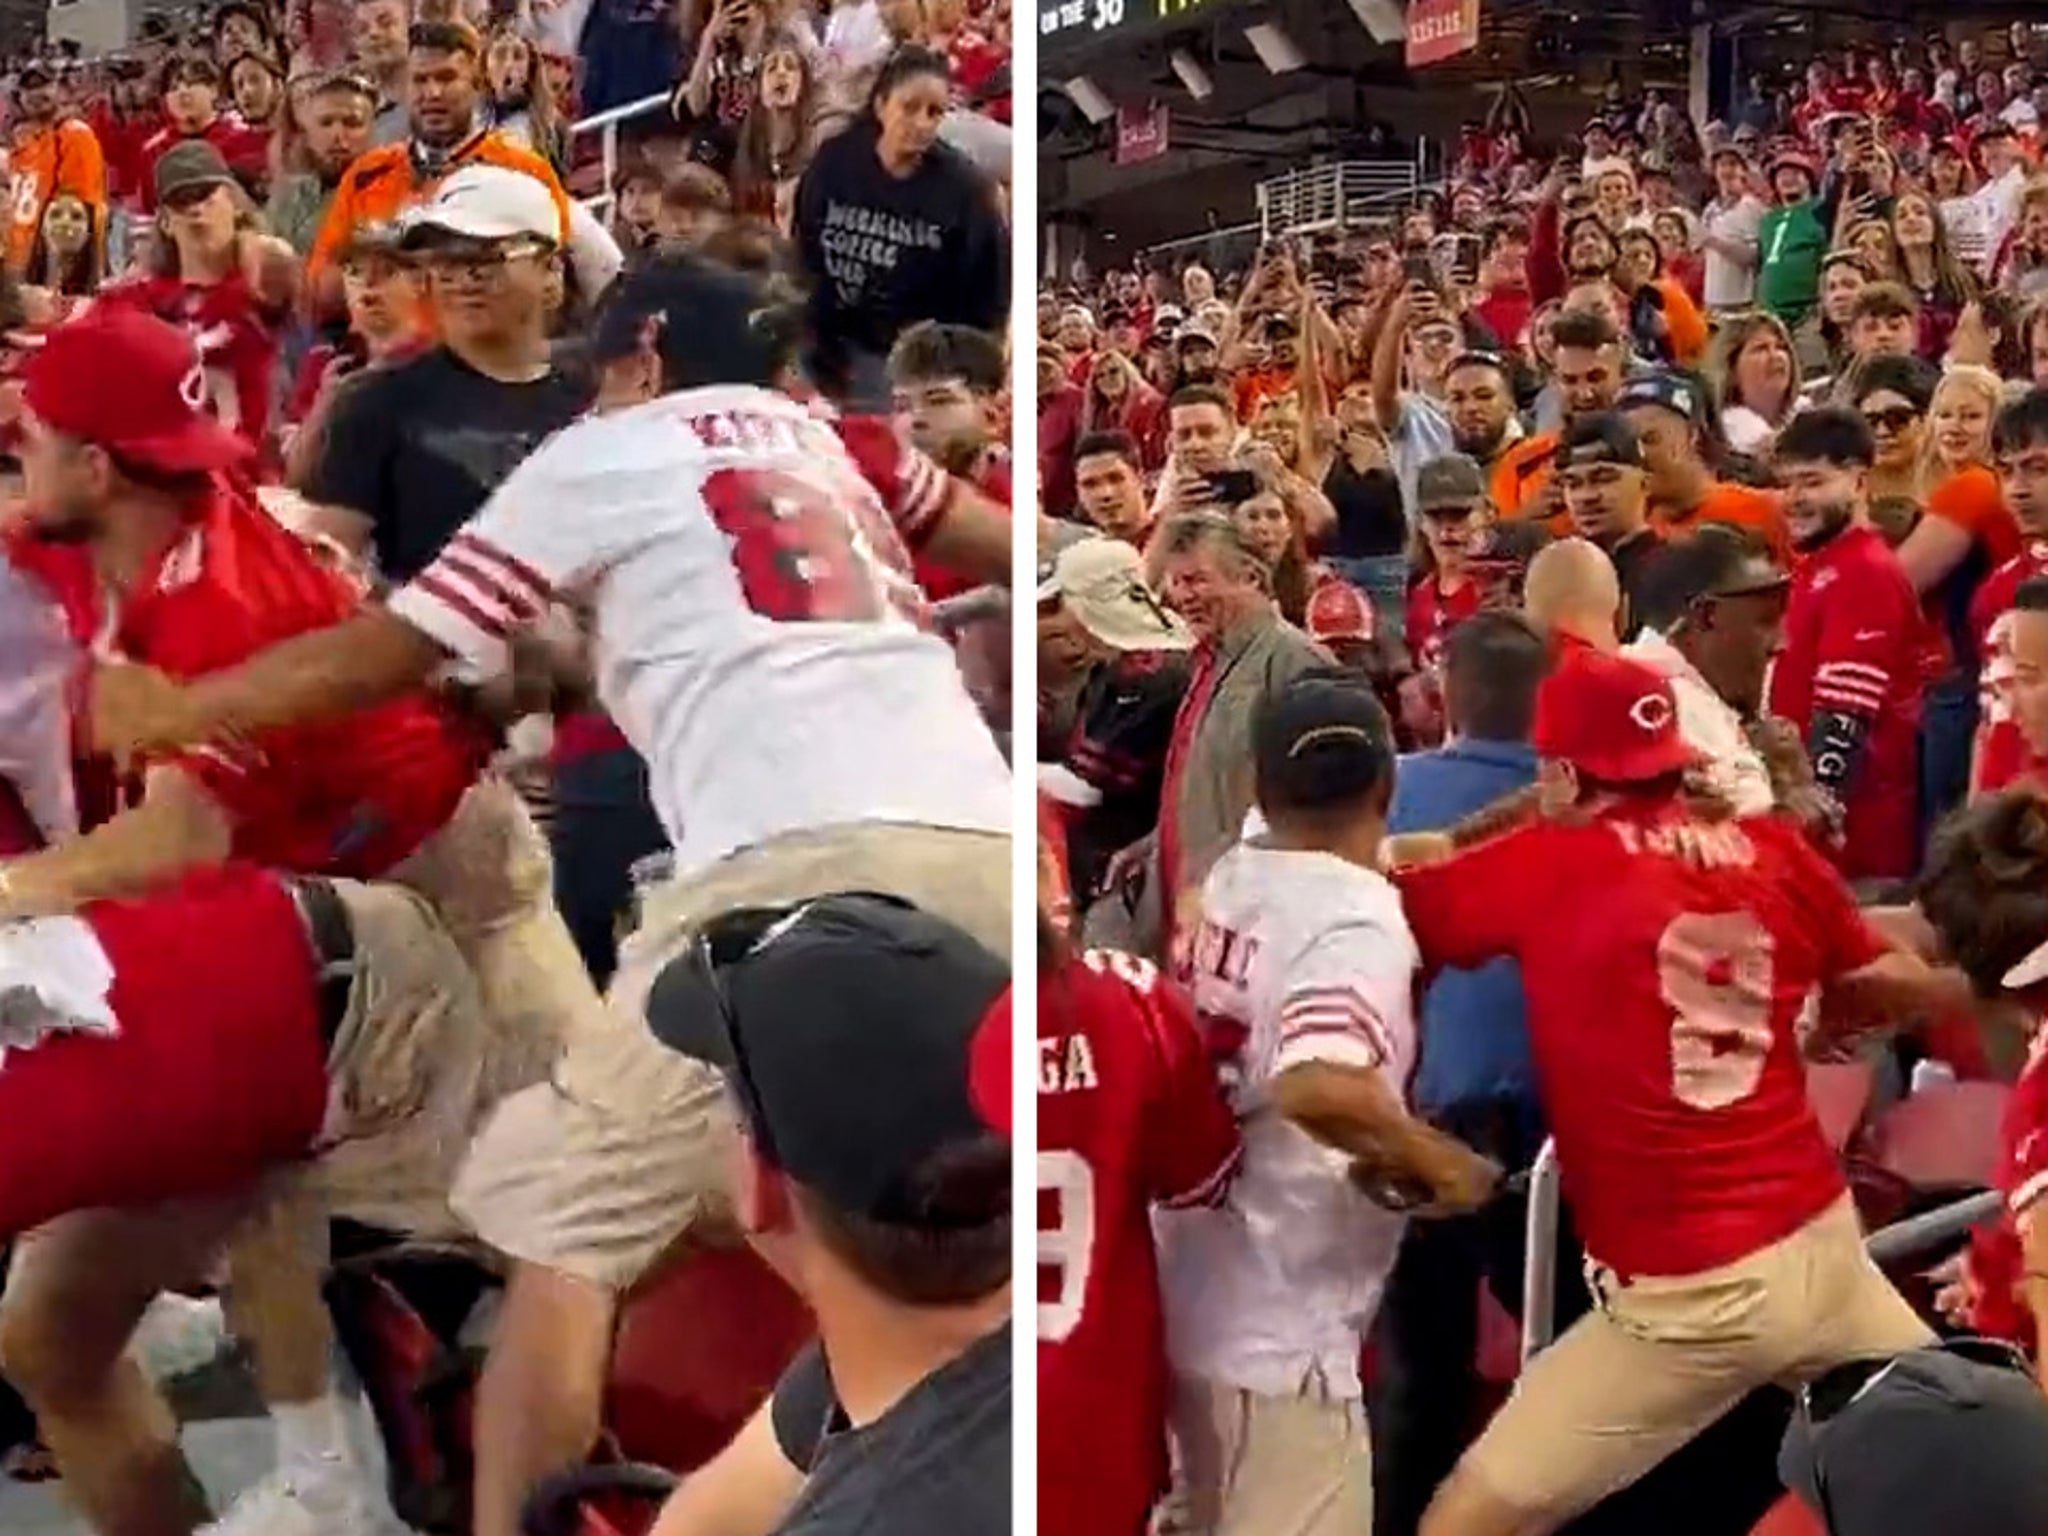 WATCH: Massive Fight Breaks Out In Final Minutes Of NFC